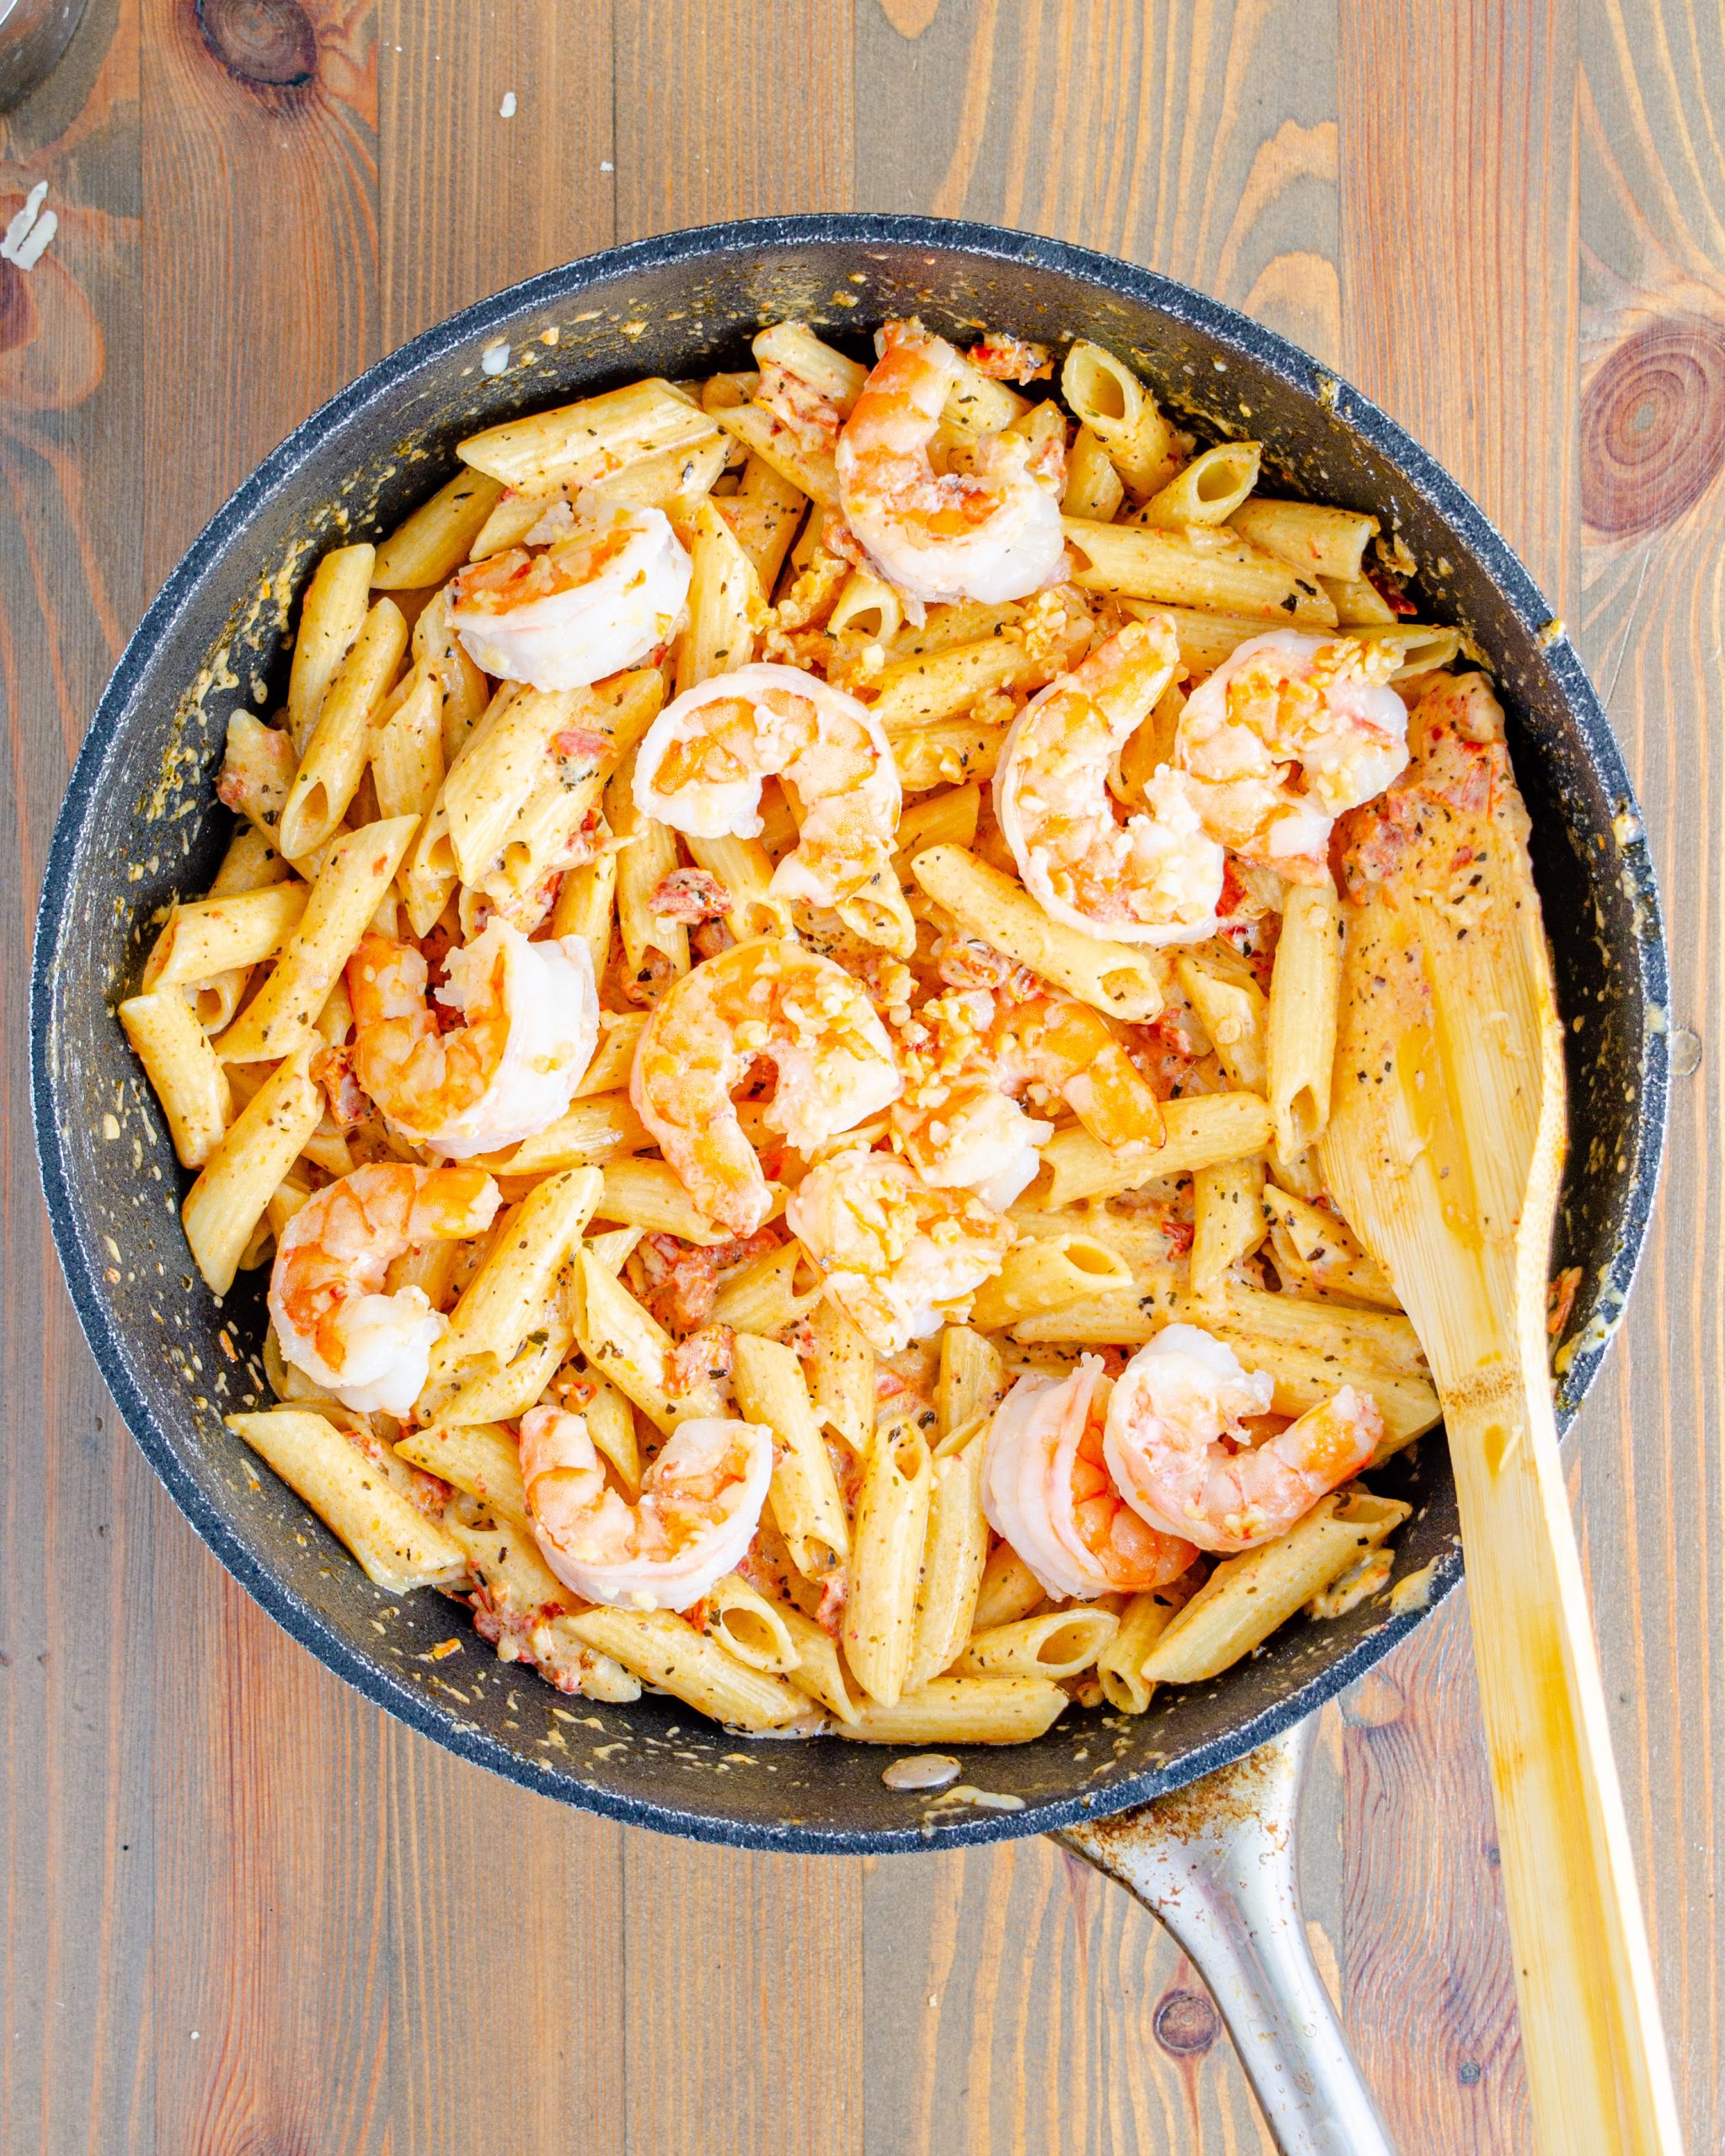 Mix in the shrimp and pasta until well combined.